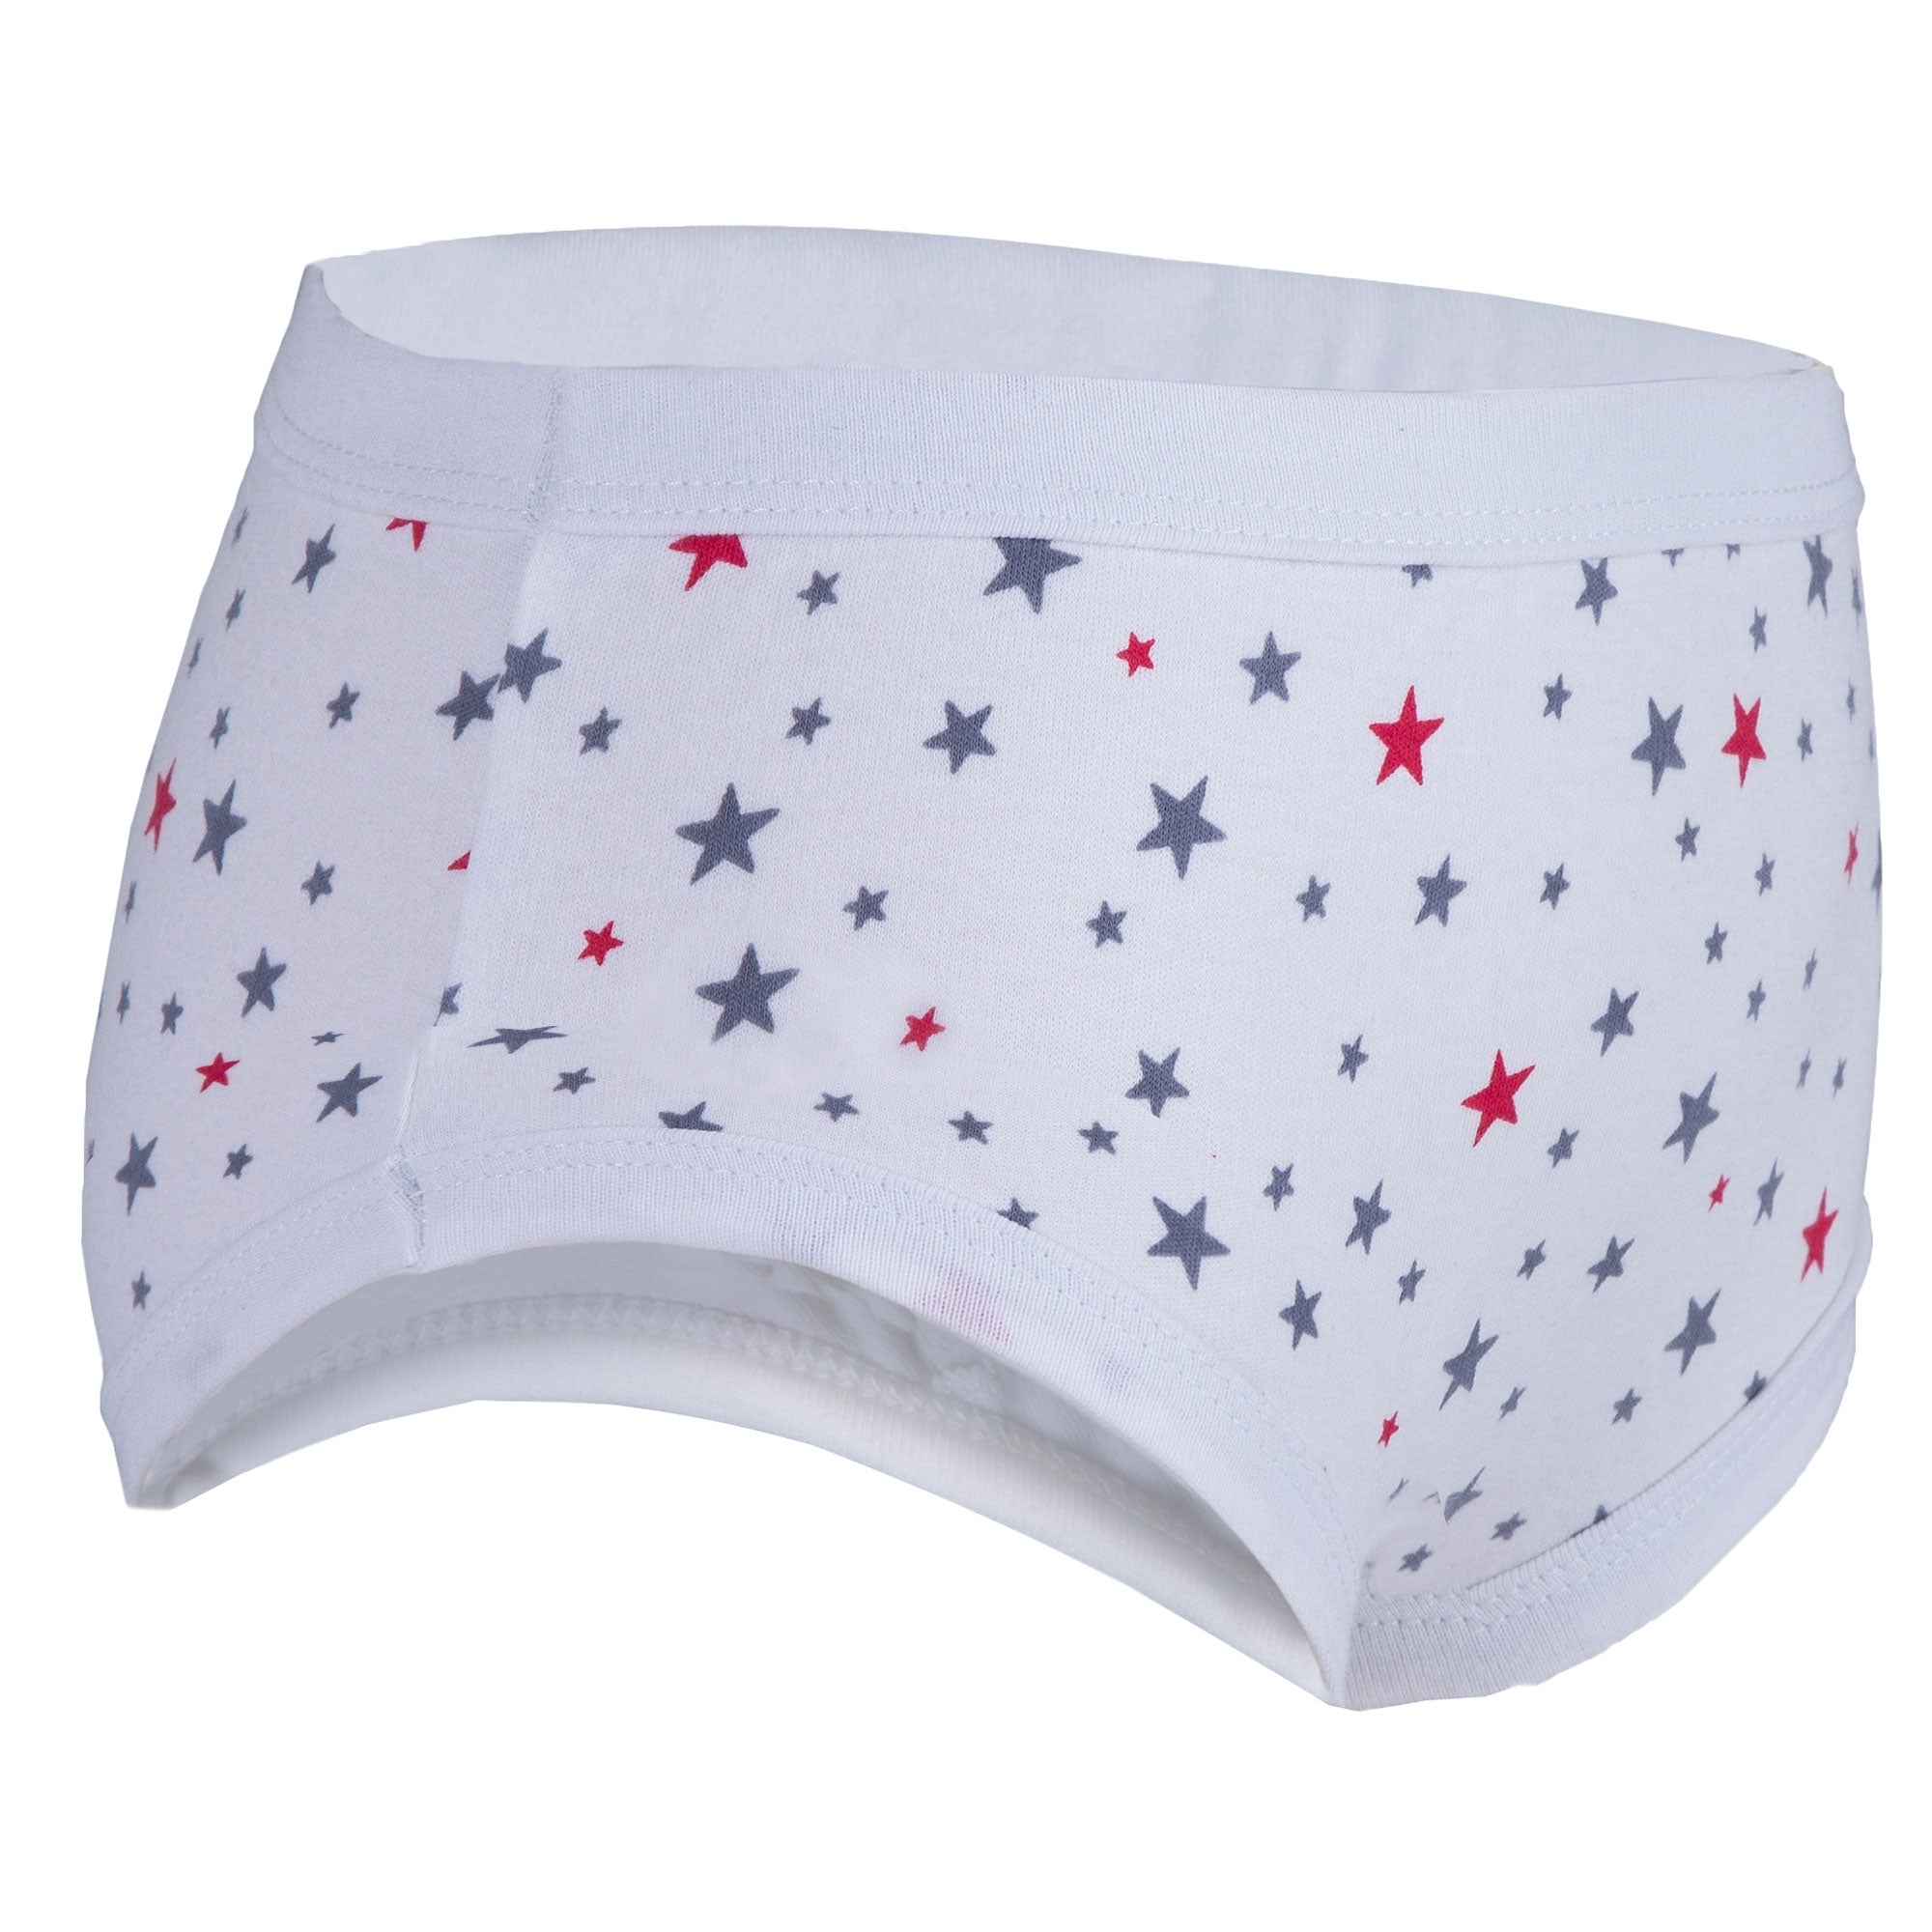 Boys Washable Absorbent Briefs: Bedwetting Store - National